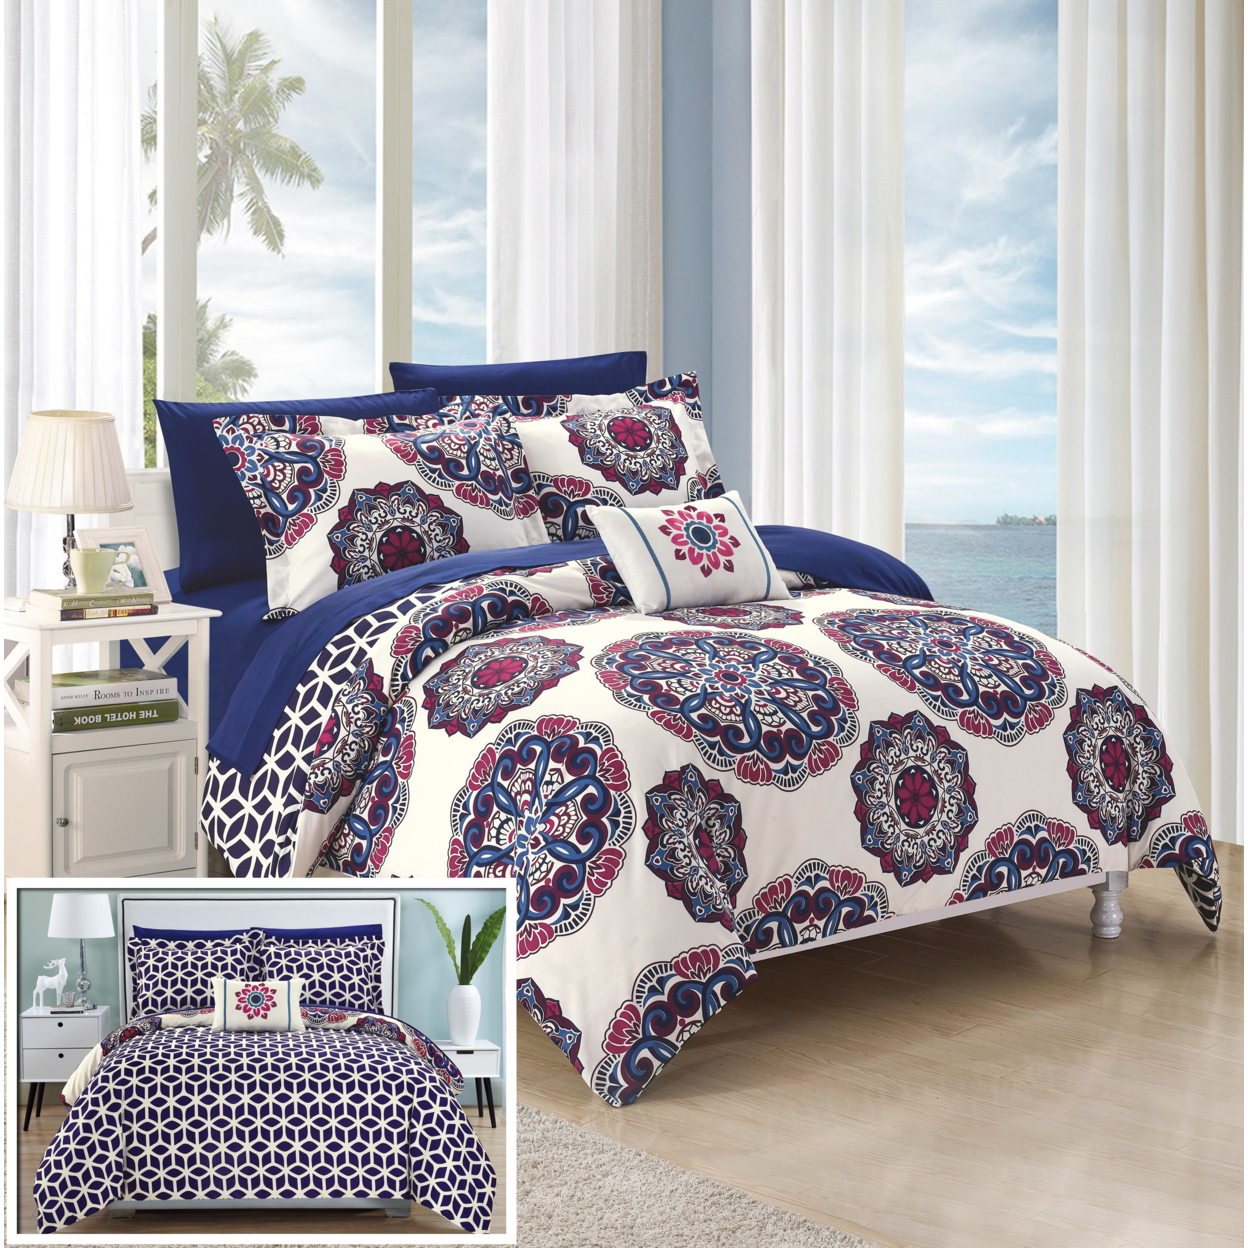 8 Or 6 Pc. Barella Super Soft Large Printed Medallion REVERSIBLE With Geometric Printed Backing Comforter Set - Navy, Queen